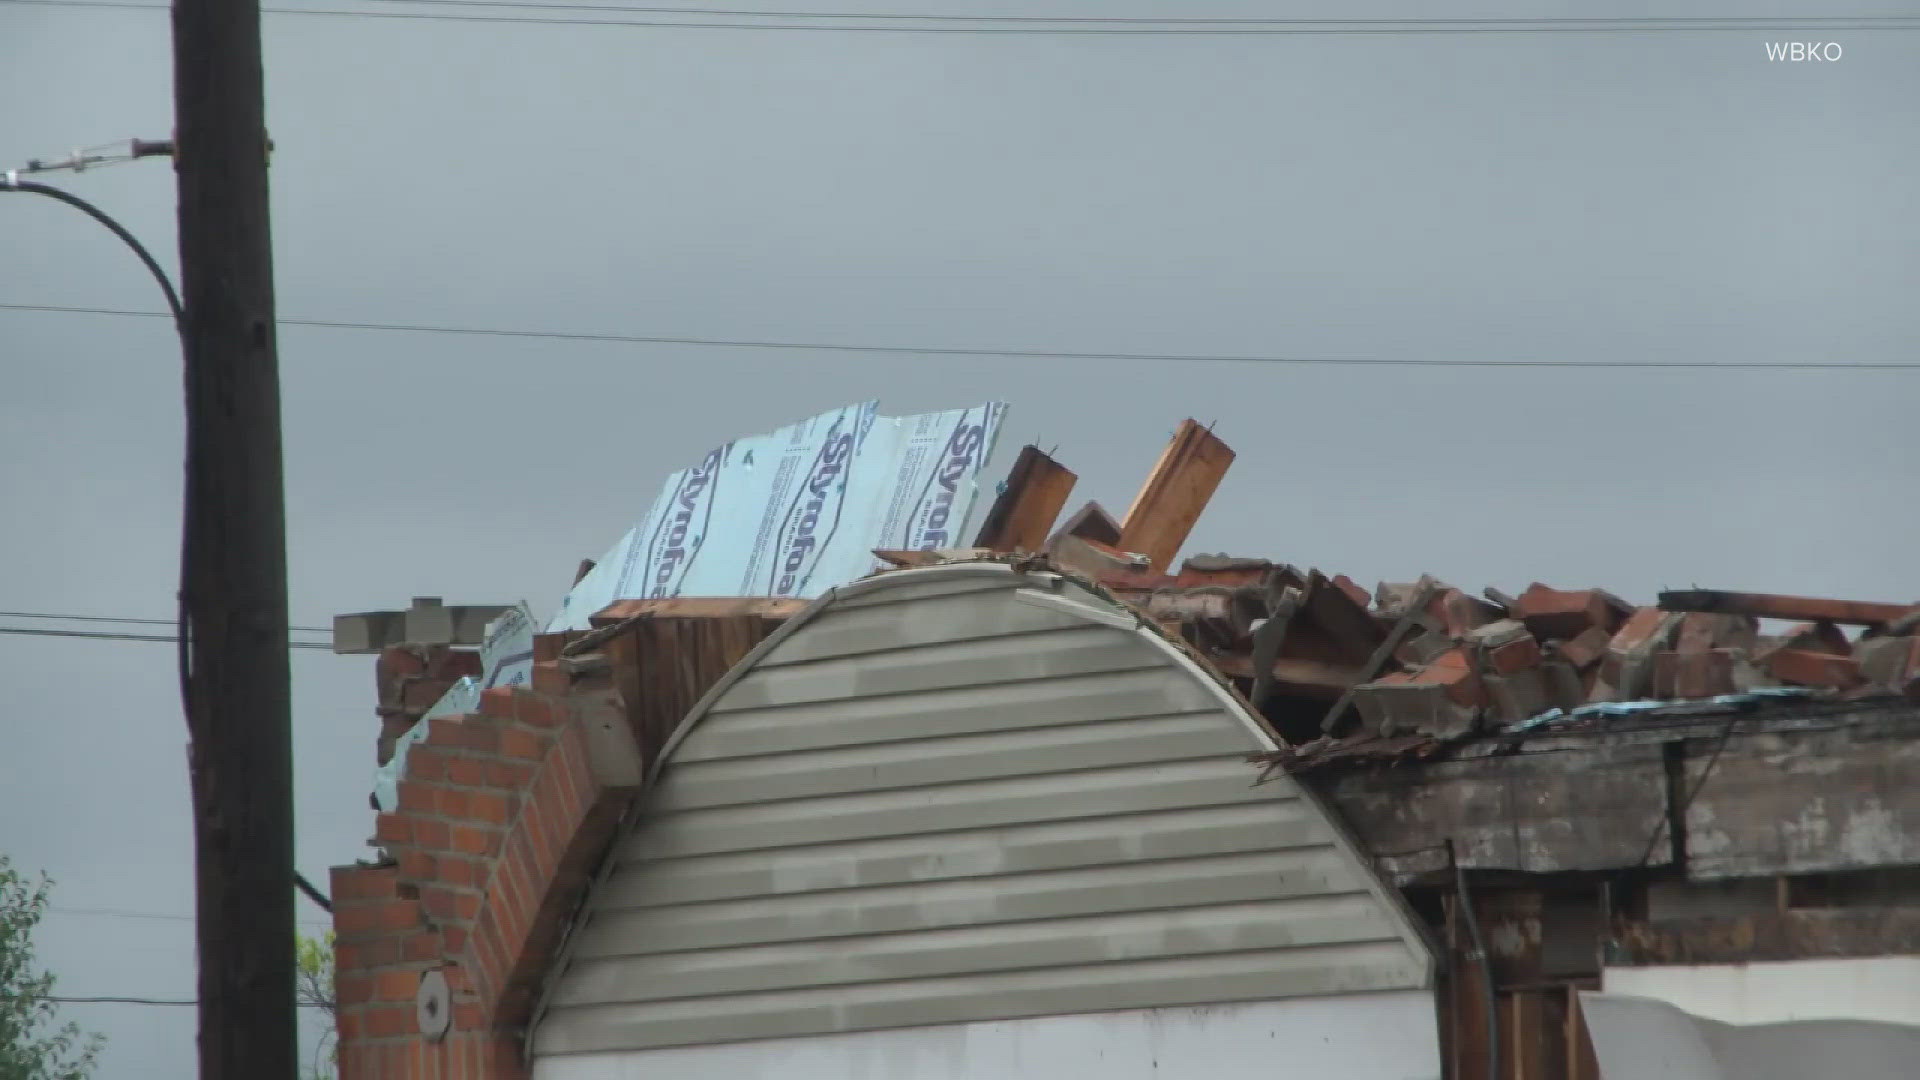 The National Weather Service said a survey in Logan County is still possible.